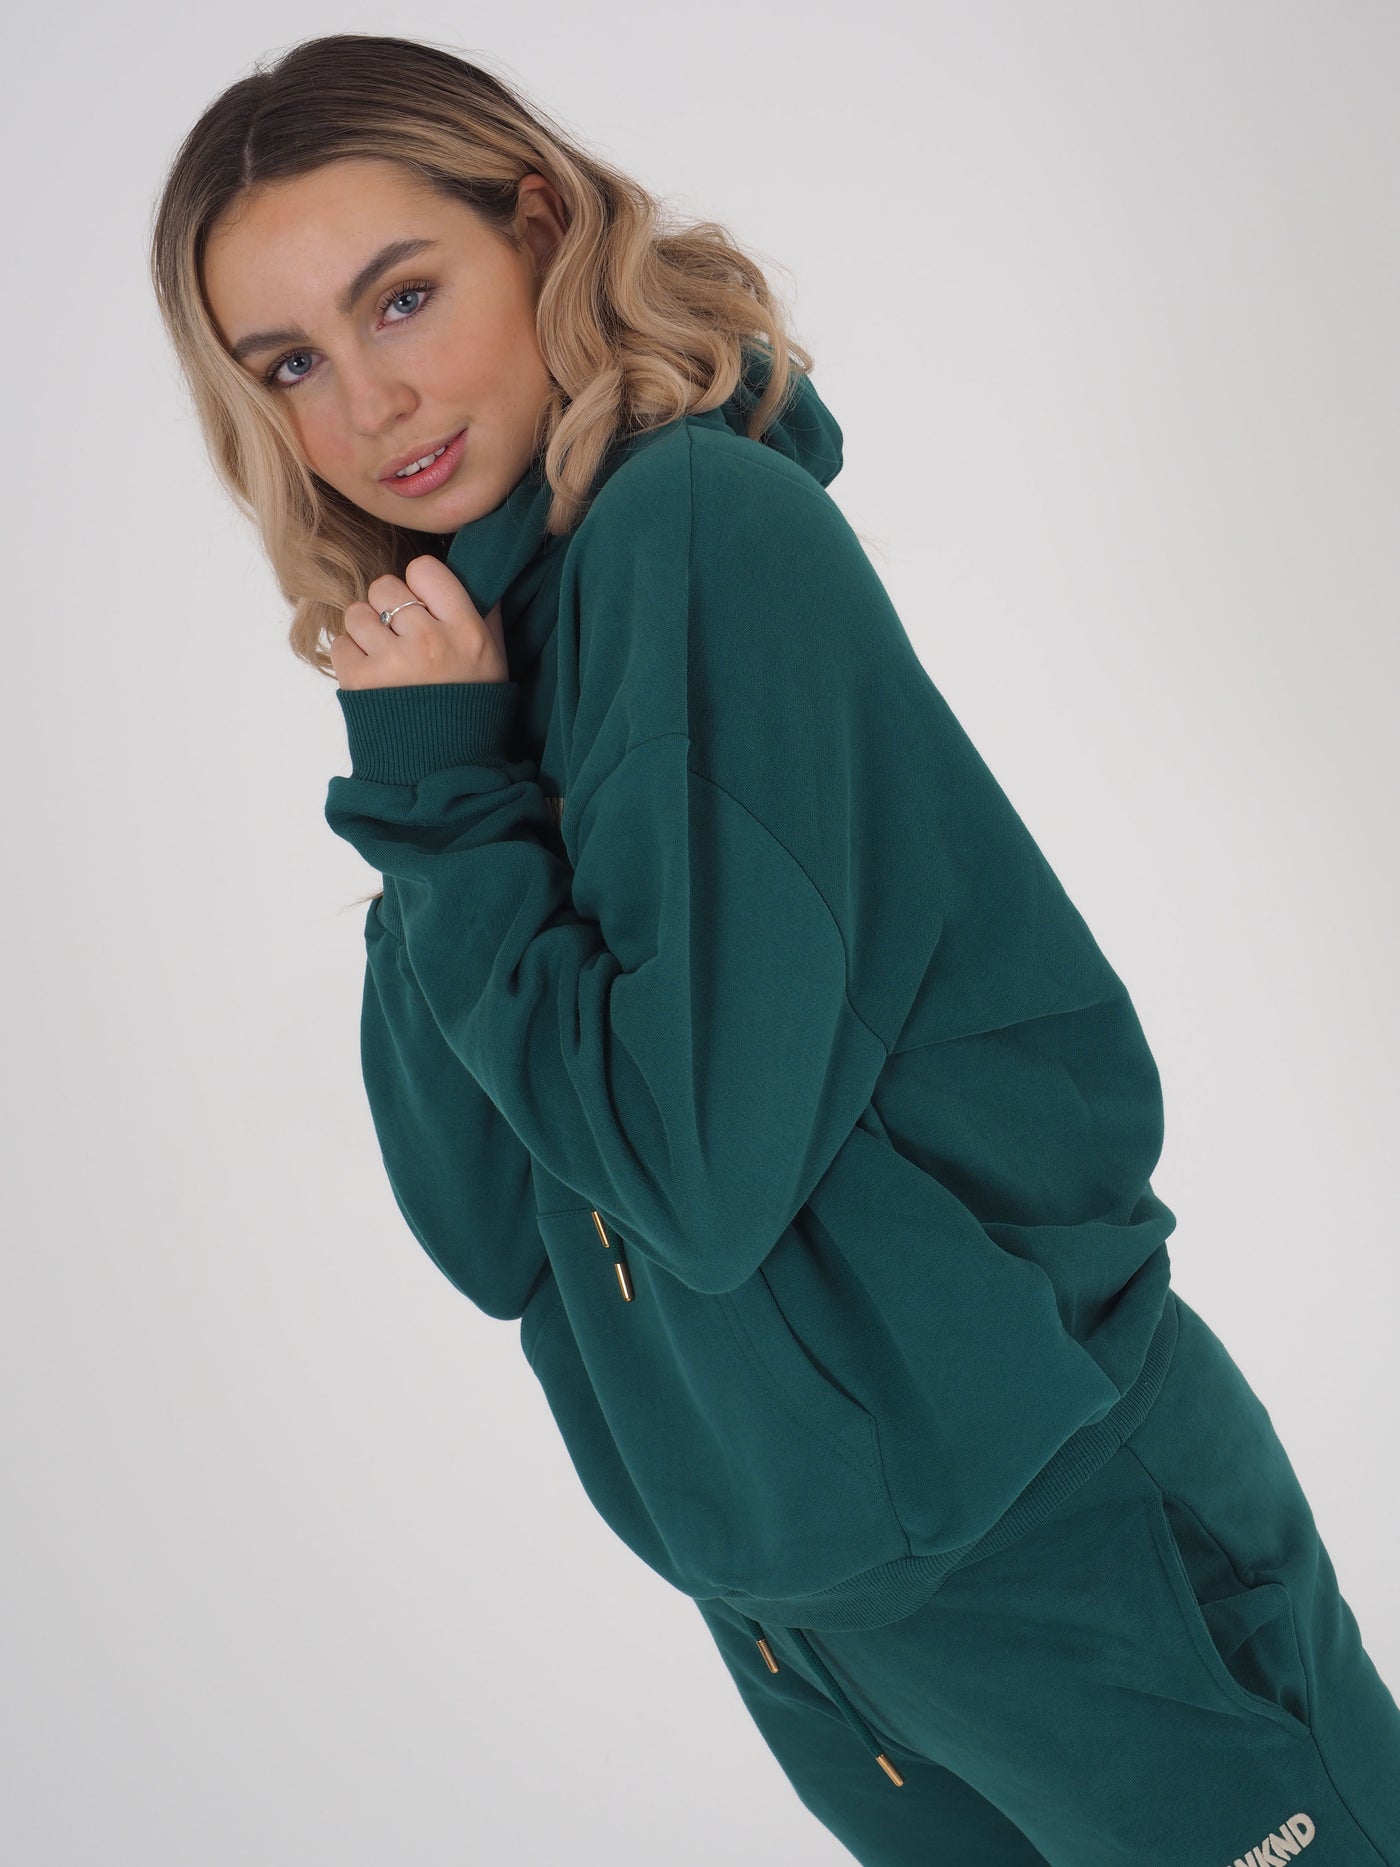 Model with blonde hair is wearing a green hoodie and matching green joggers.